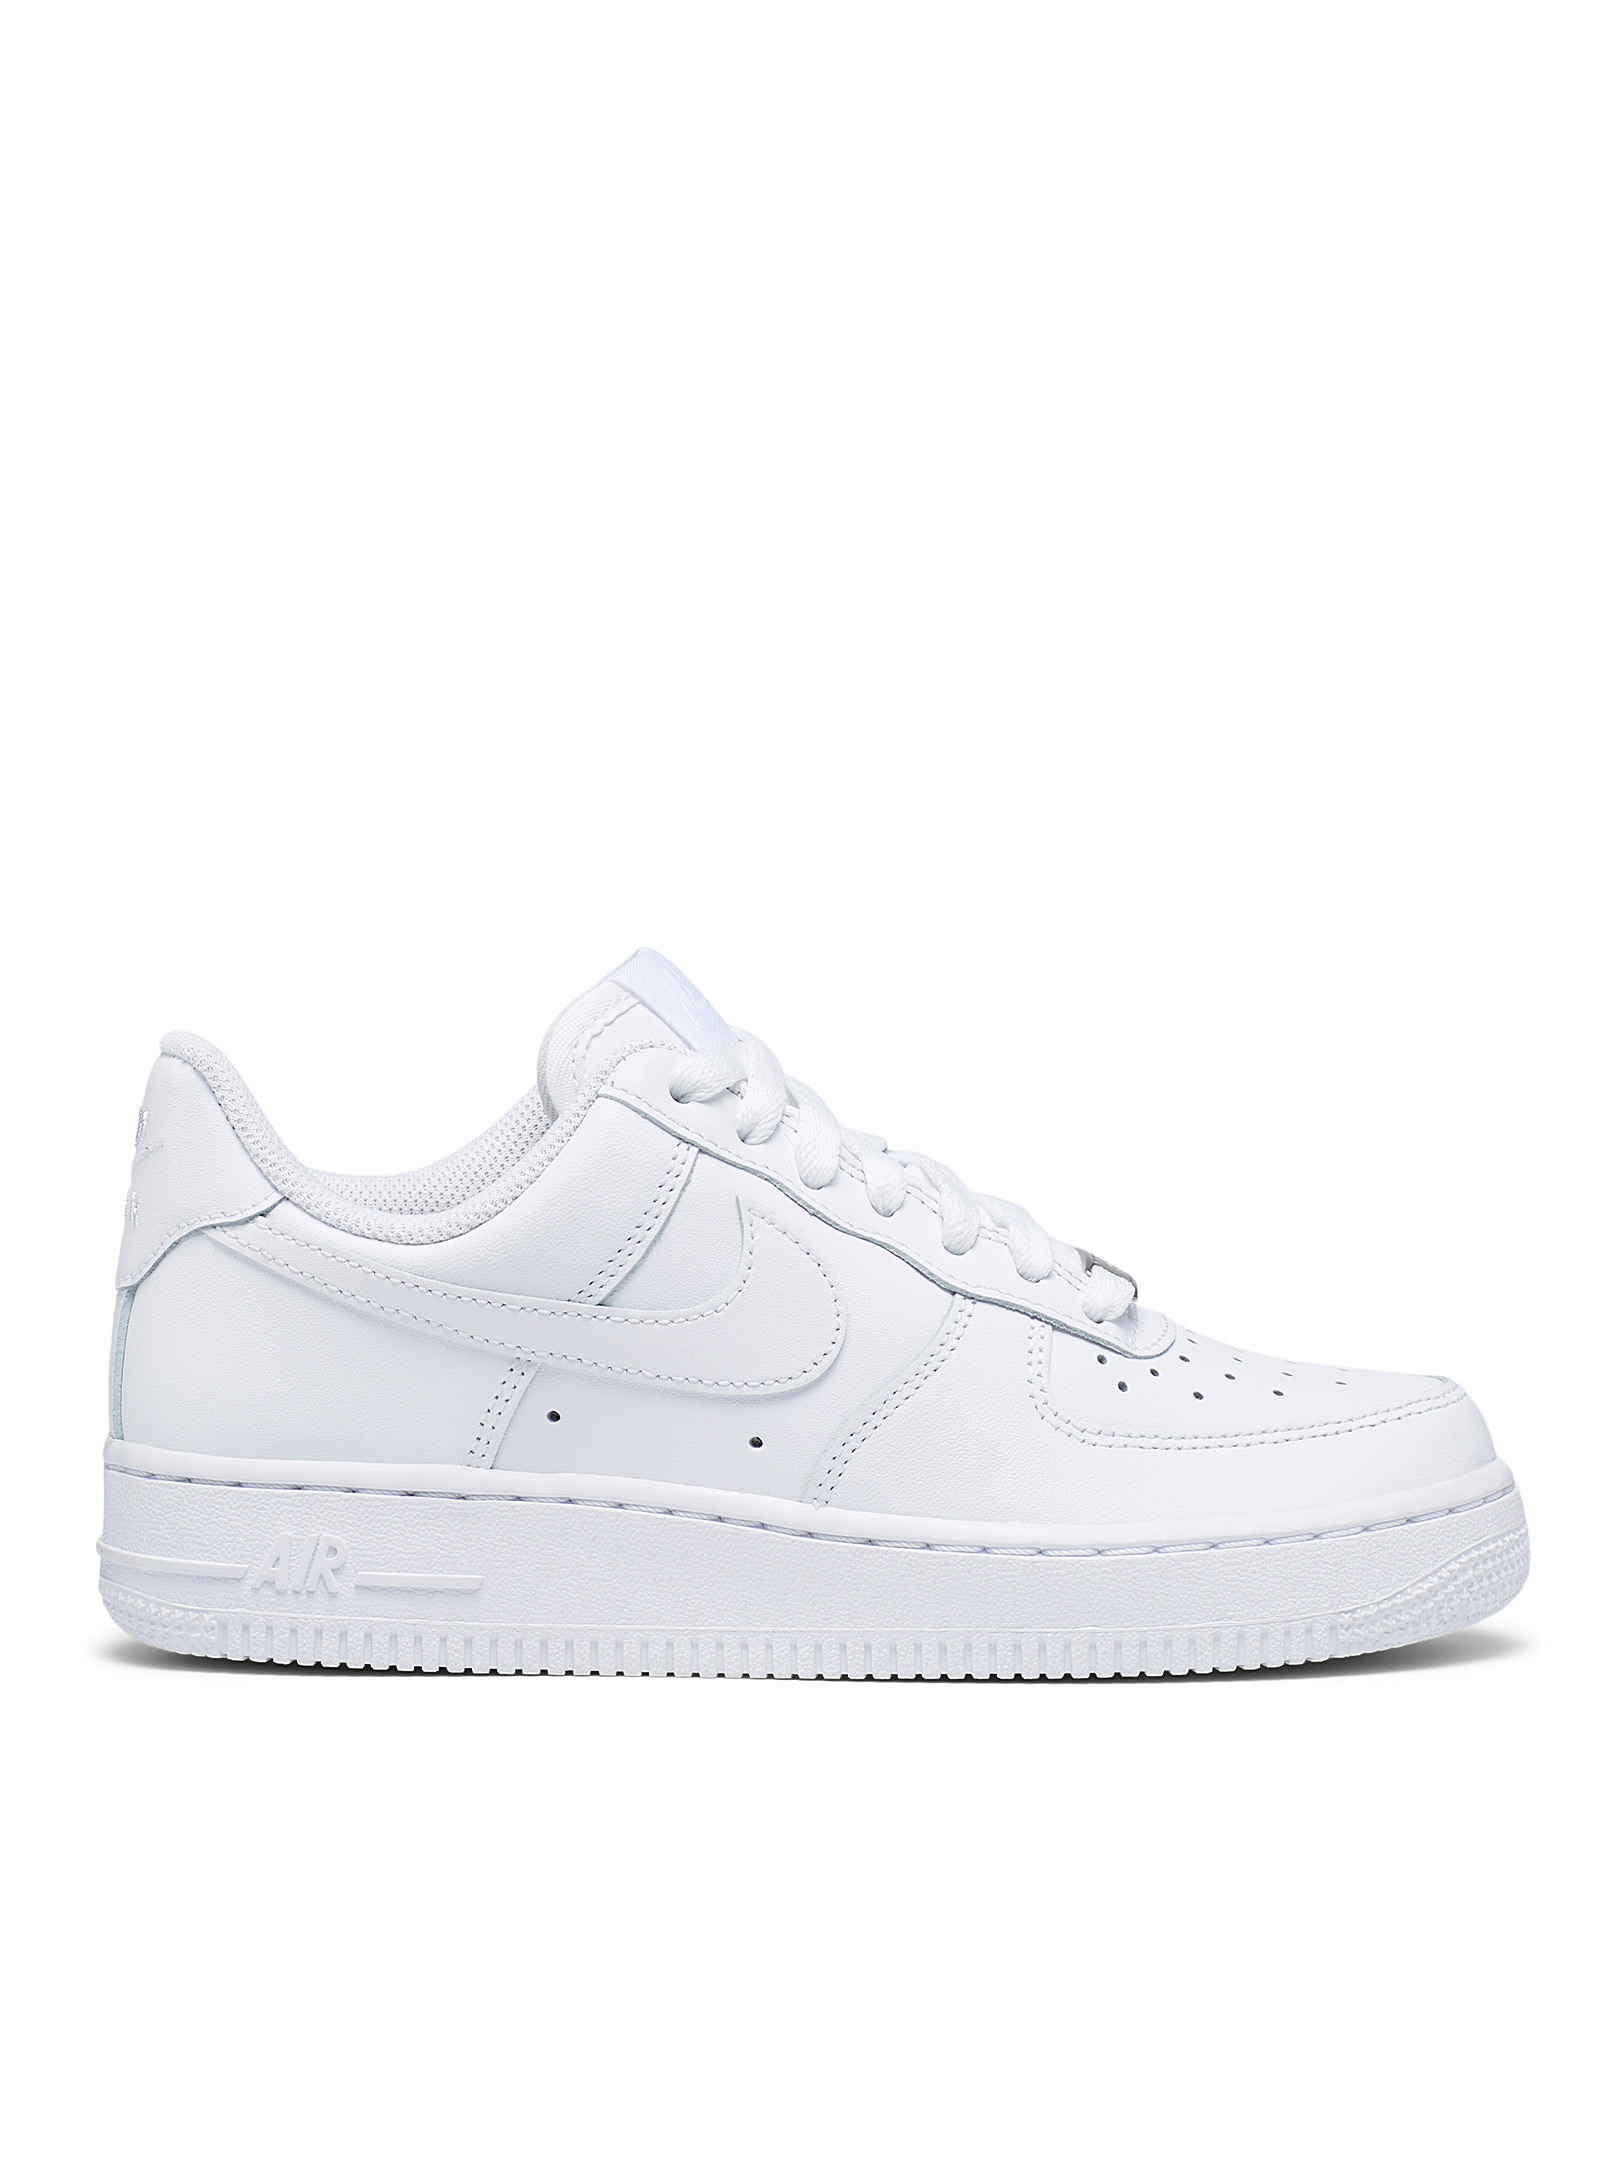 Nike - Chaussures Le Sneaker Air Force 1 '07 blanc Femme